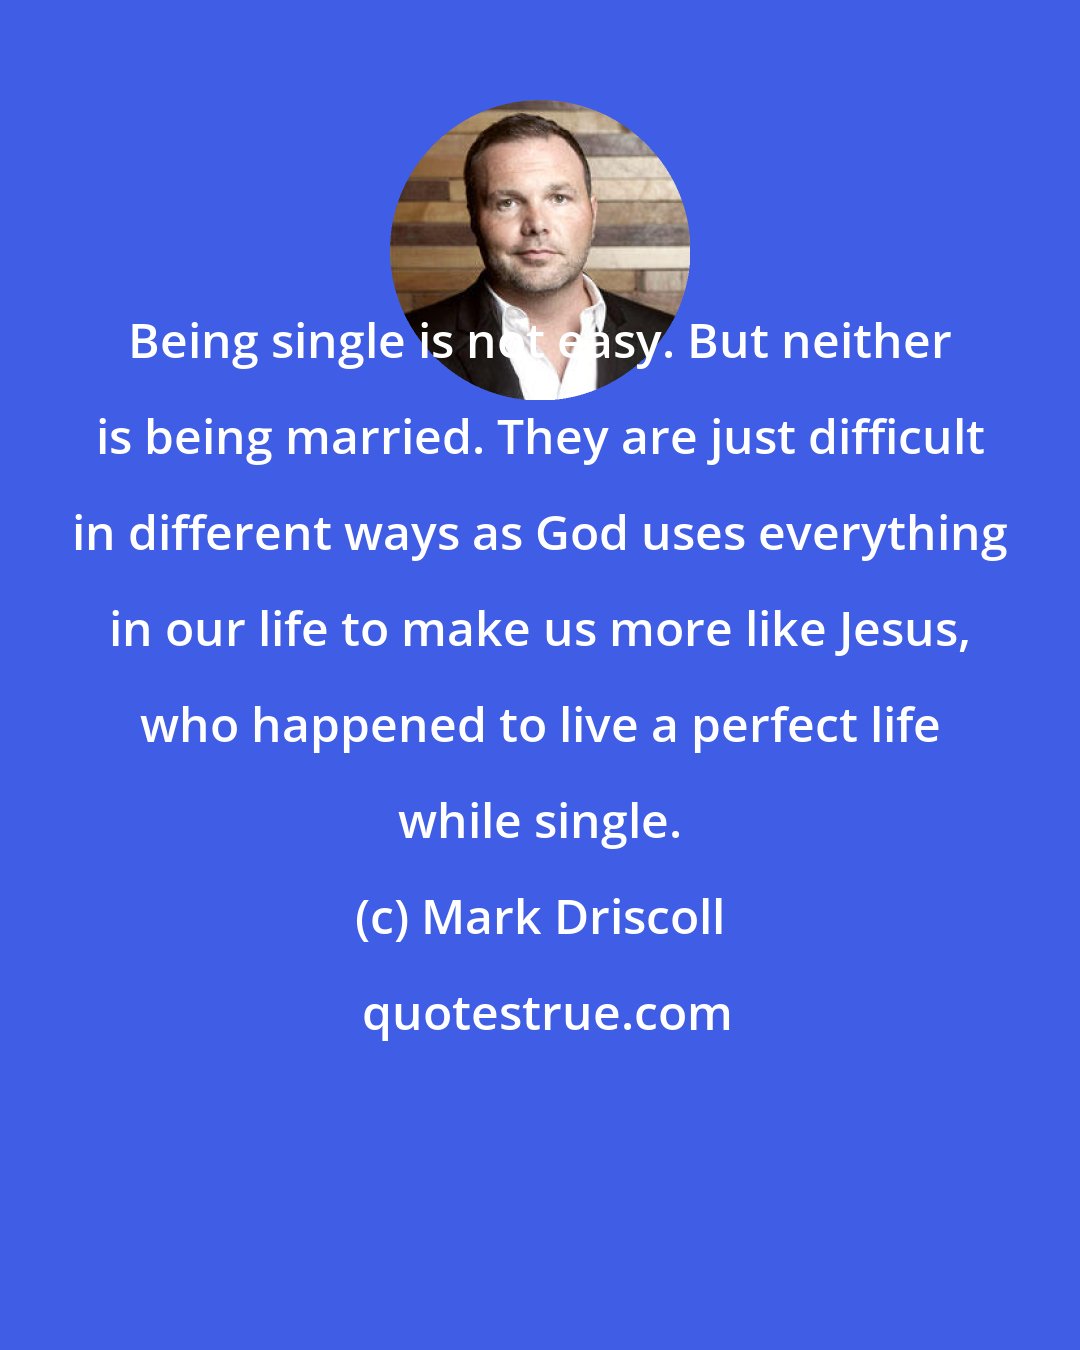 Mark Driscoll: Being single is not easy. But neither is being married. They are just difficult in different ways as God uses everything in our life to make us more like Jesus, who happened to live a perfect life while single.